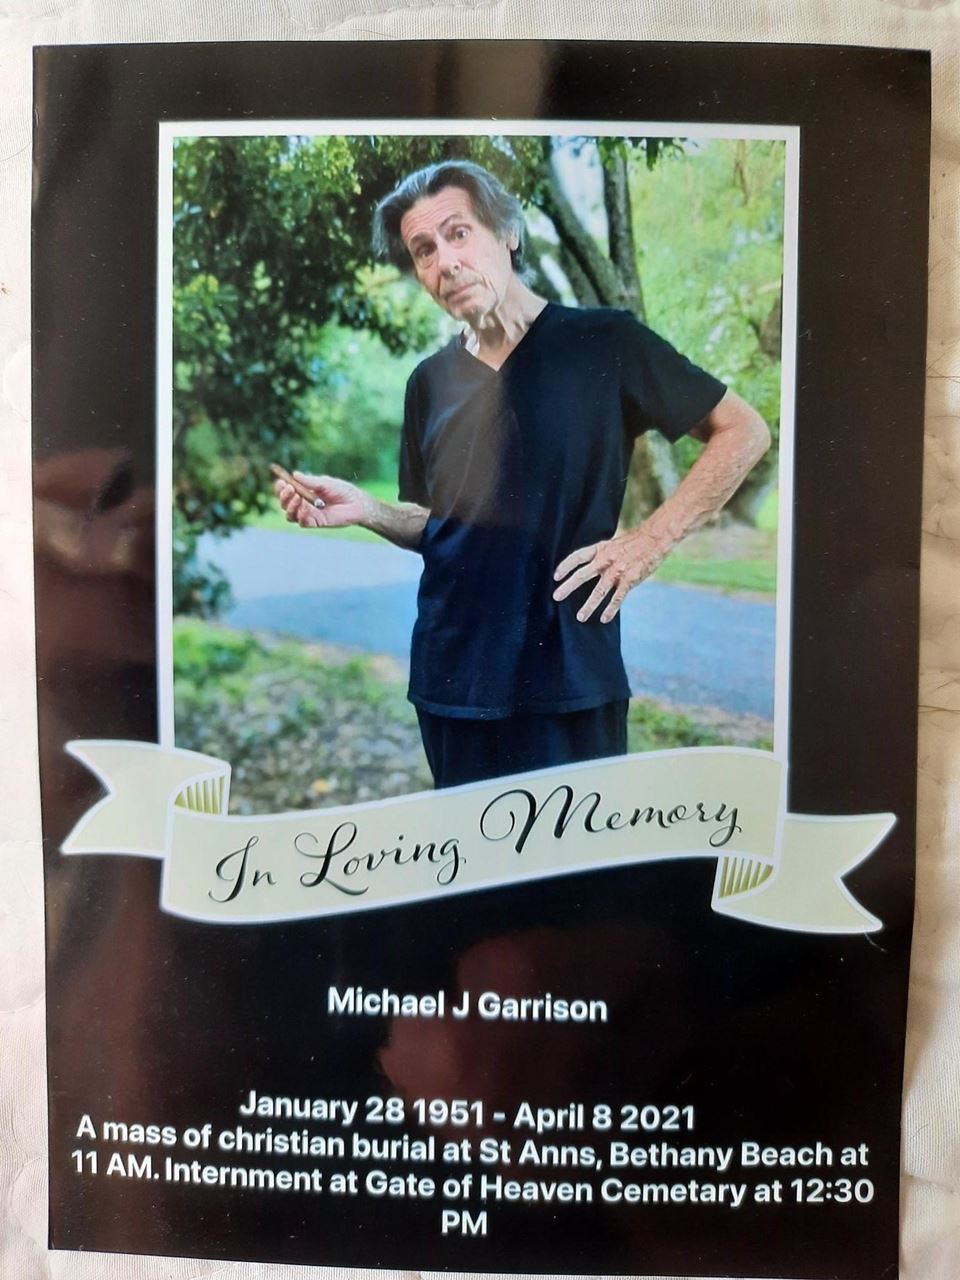 Memorial Card for Michael J Garrison. The card shows an image of Mr. Garrison and reads "In Loving Memory. Michael J Garrison. January 28, 1951 - April 8, 2021. A mass of Christian burial at St Anns, Bethany Beach at 11 AM. Internment at Gate of Heaven Cemetery at 12:30 PM."